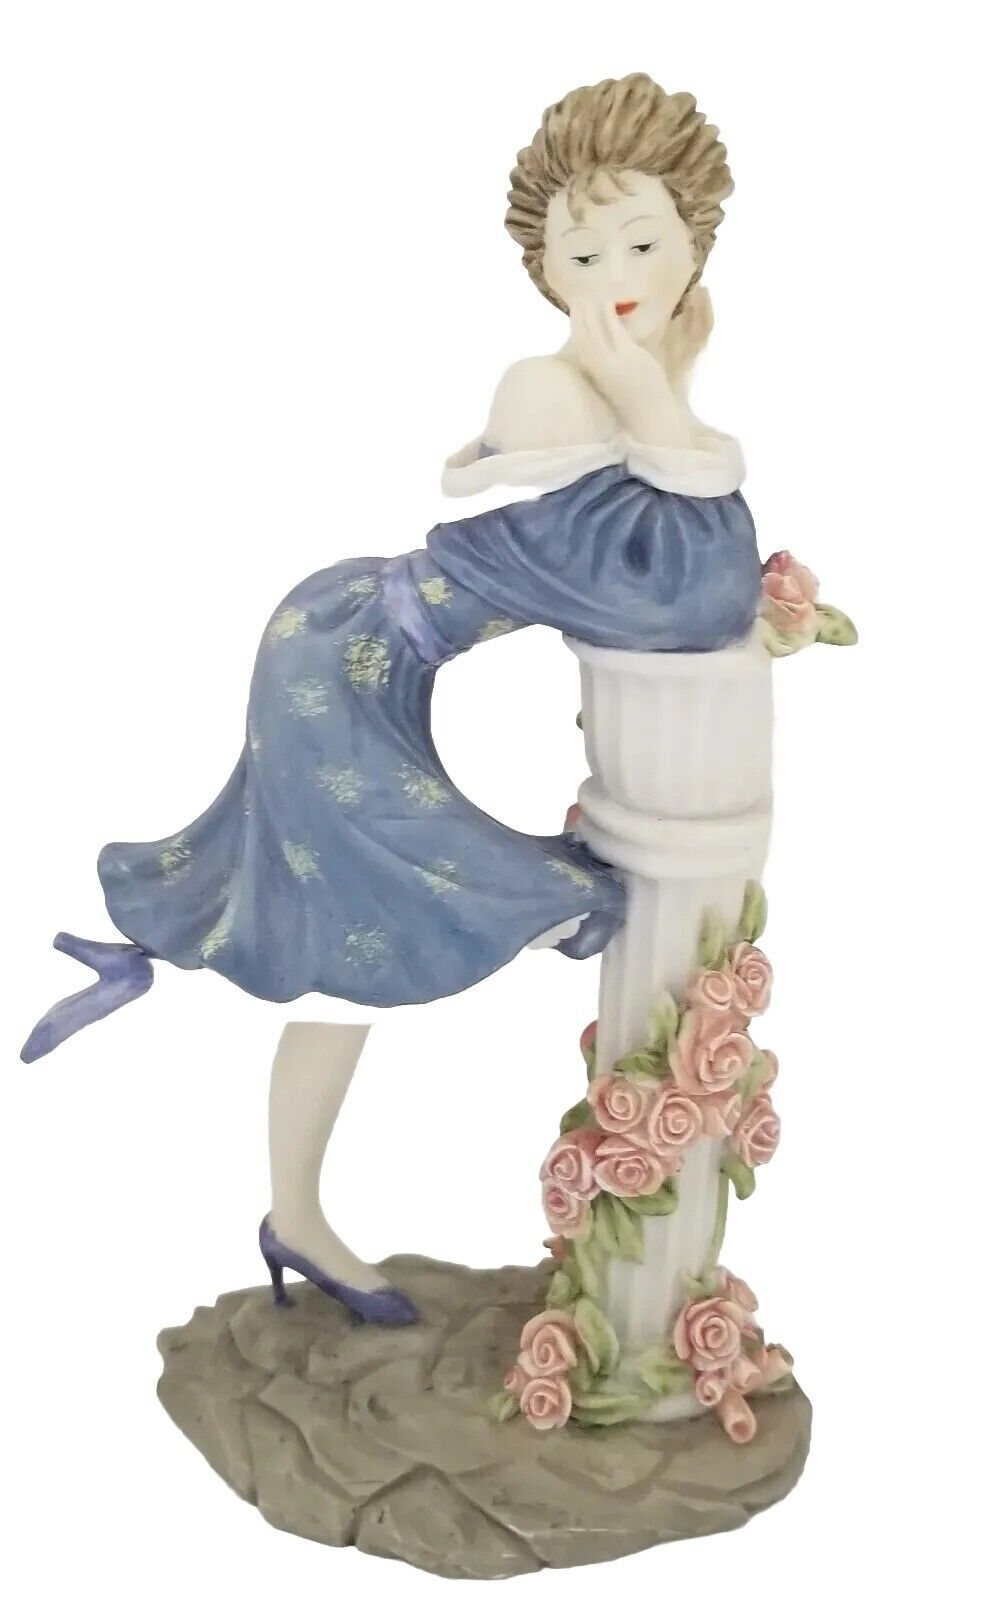  Woman Lady Dress up High Heels leaning on Floral decorat Pole Figurine Ceremic 